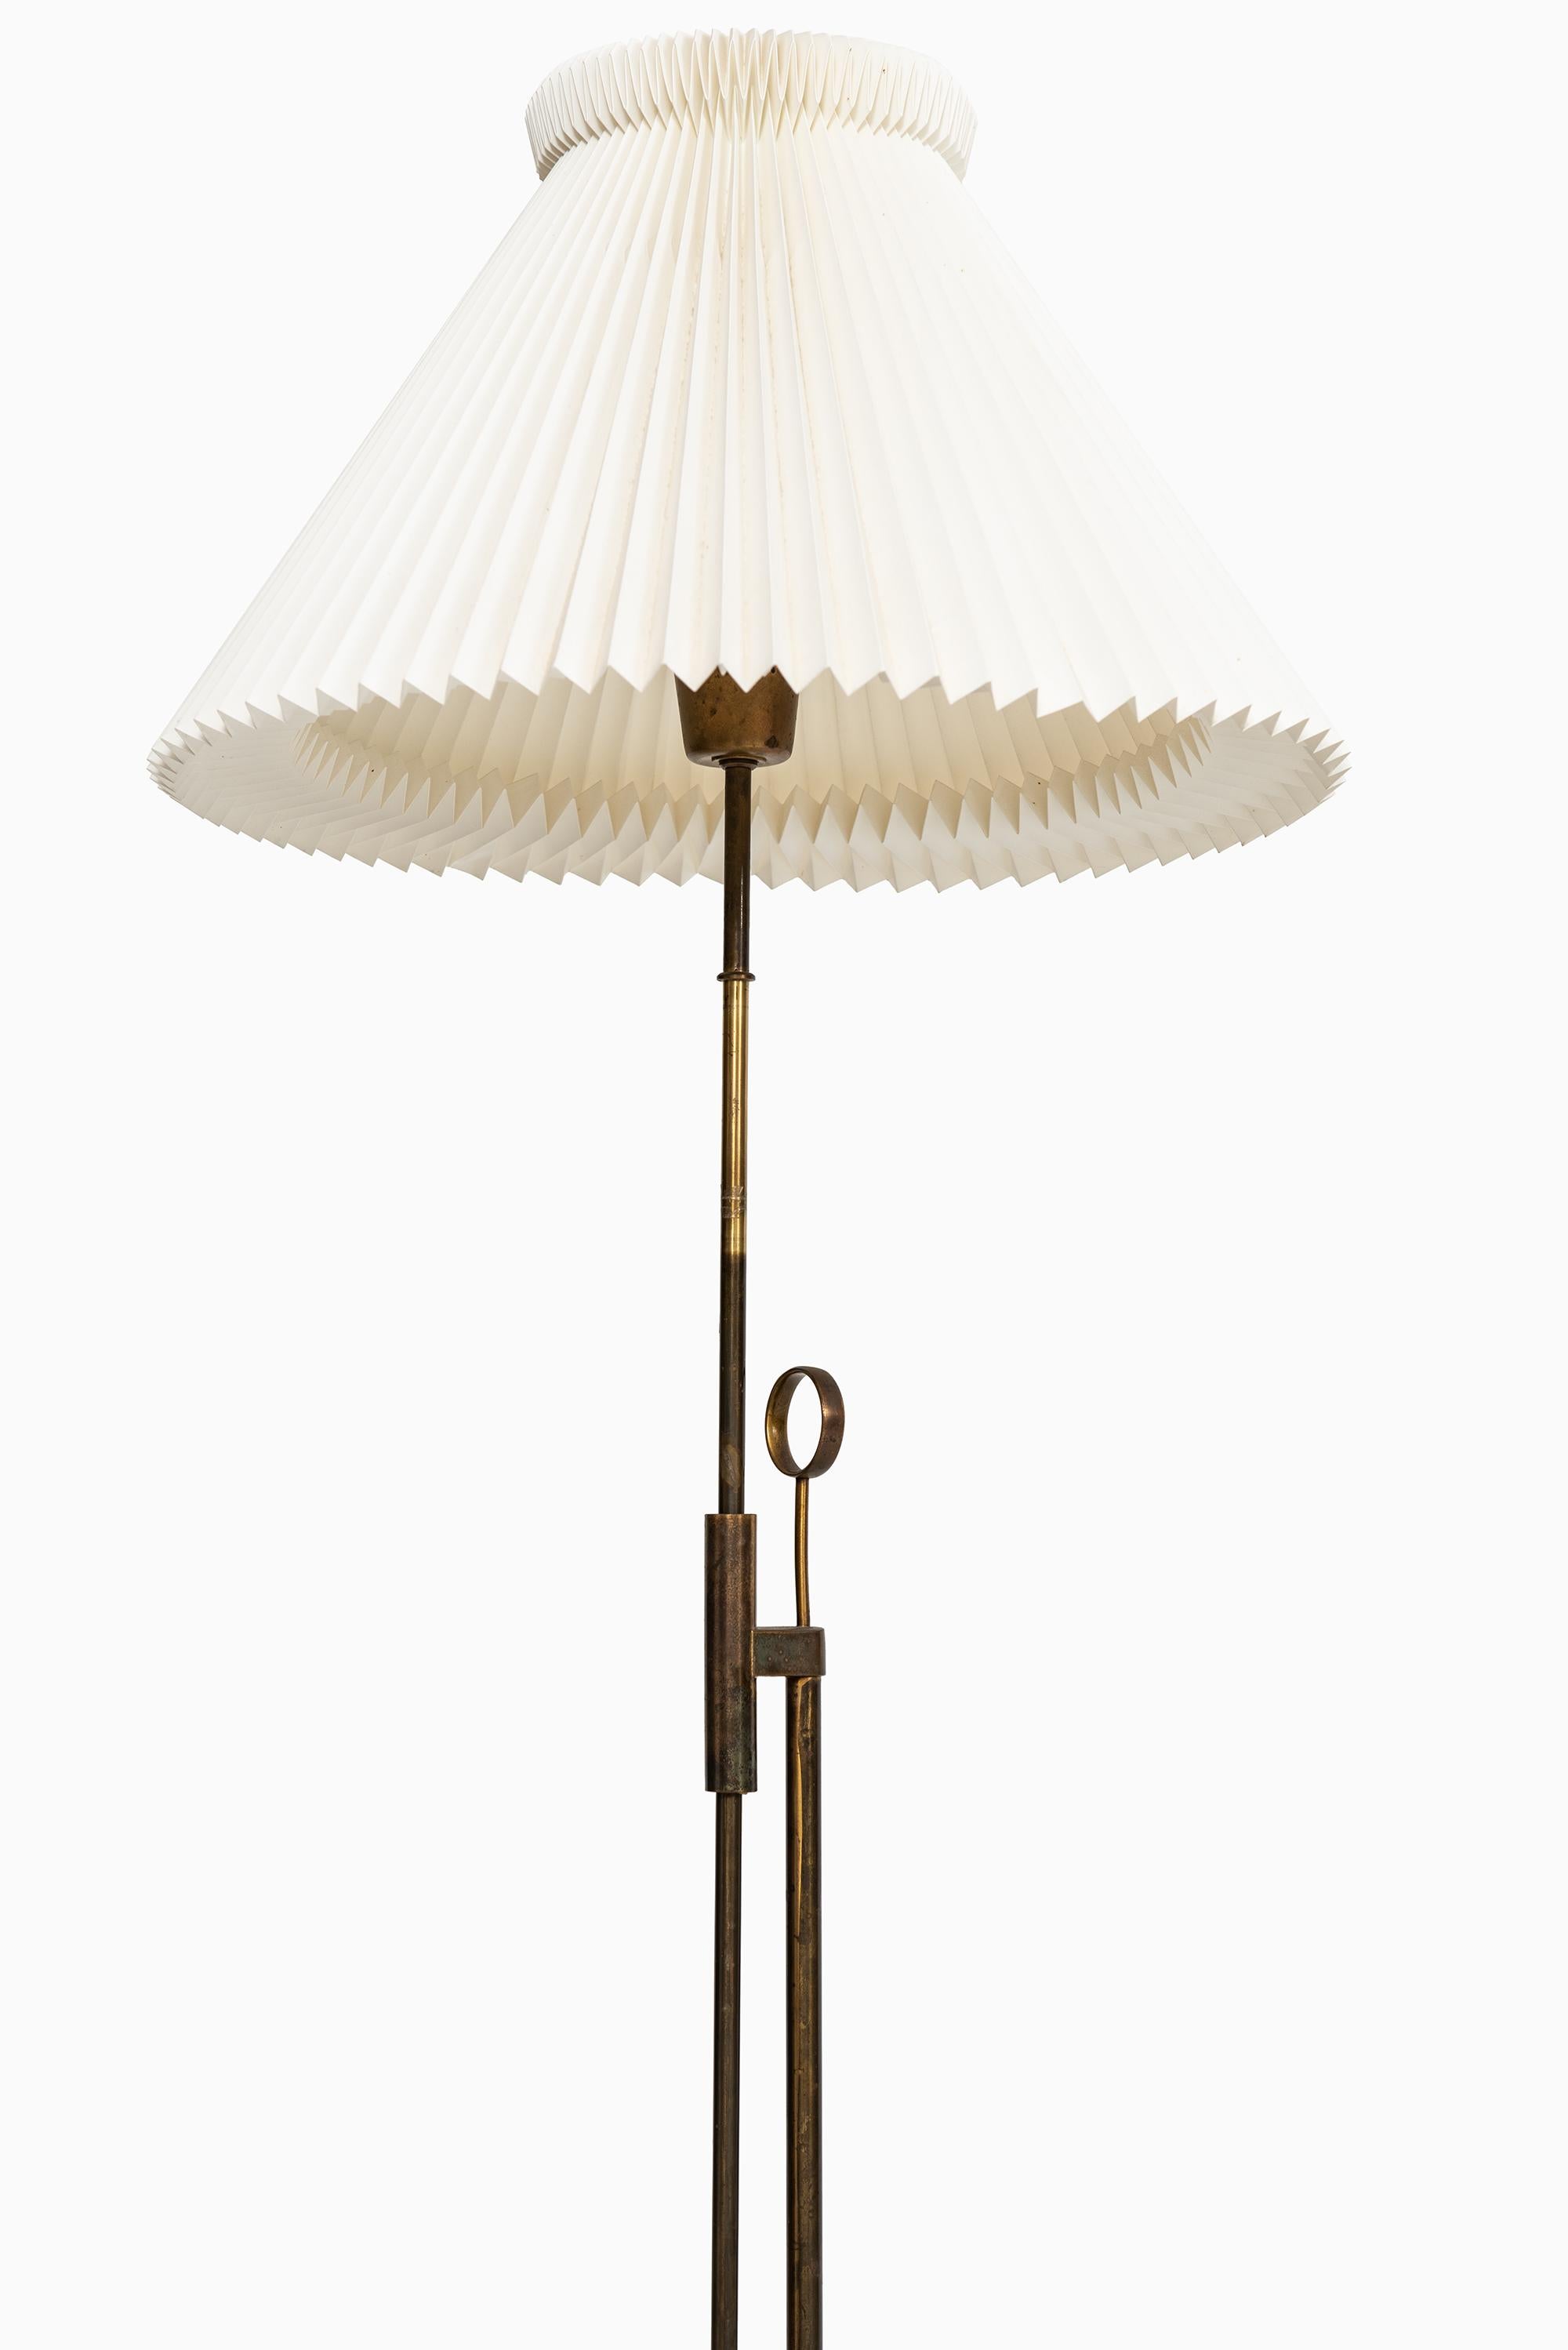 Height adjustable floor lamp in brass. Produced by Falkenbergs Belysning in Sweden. Dimensions as photographed (W x D x H): 44 x 44 x 132-175 cm.